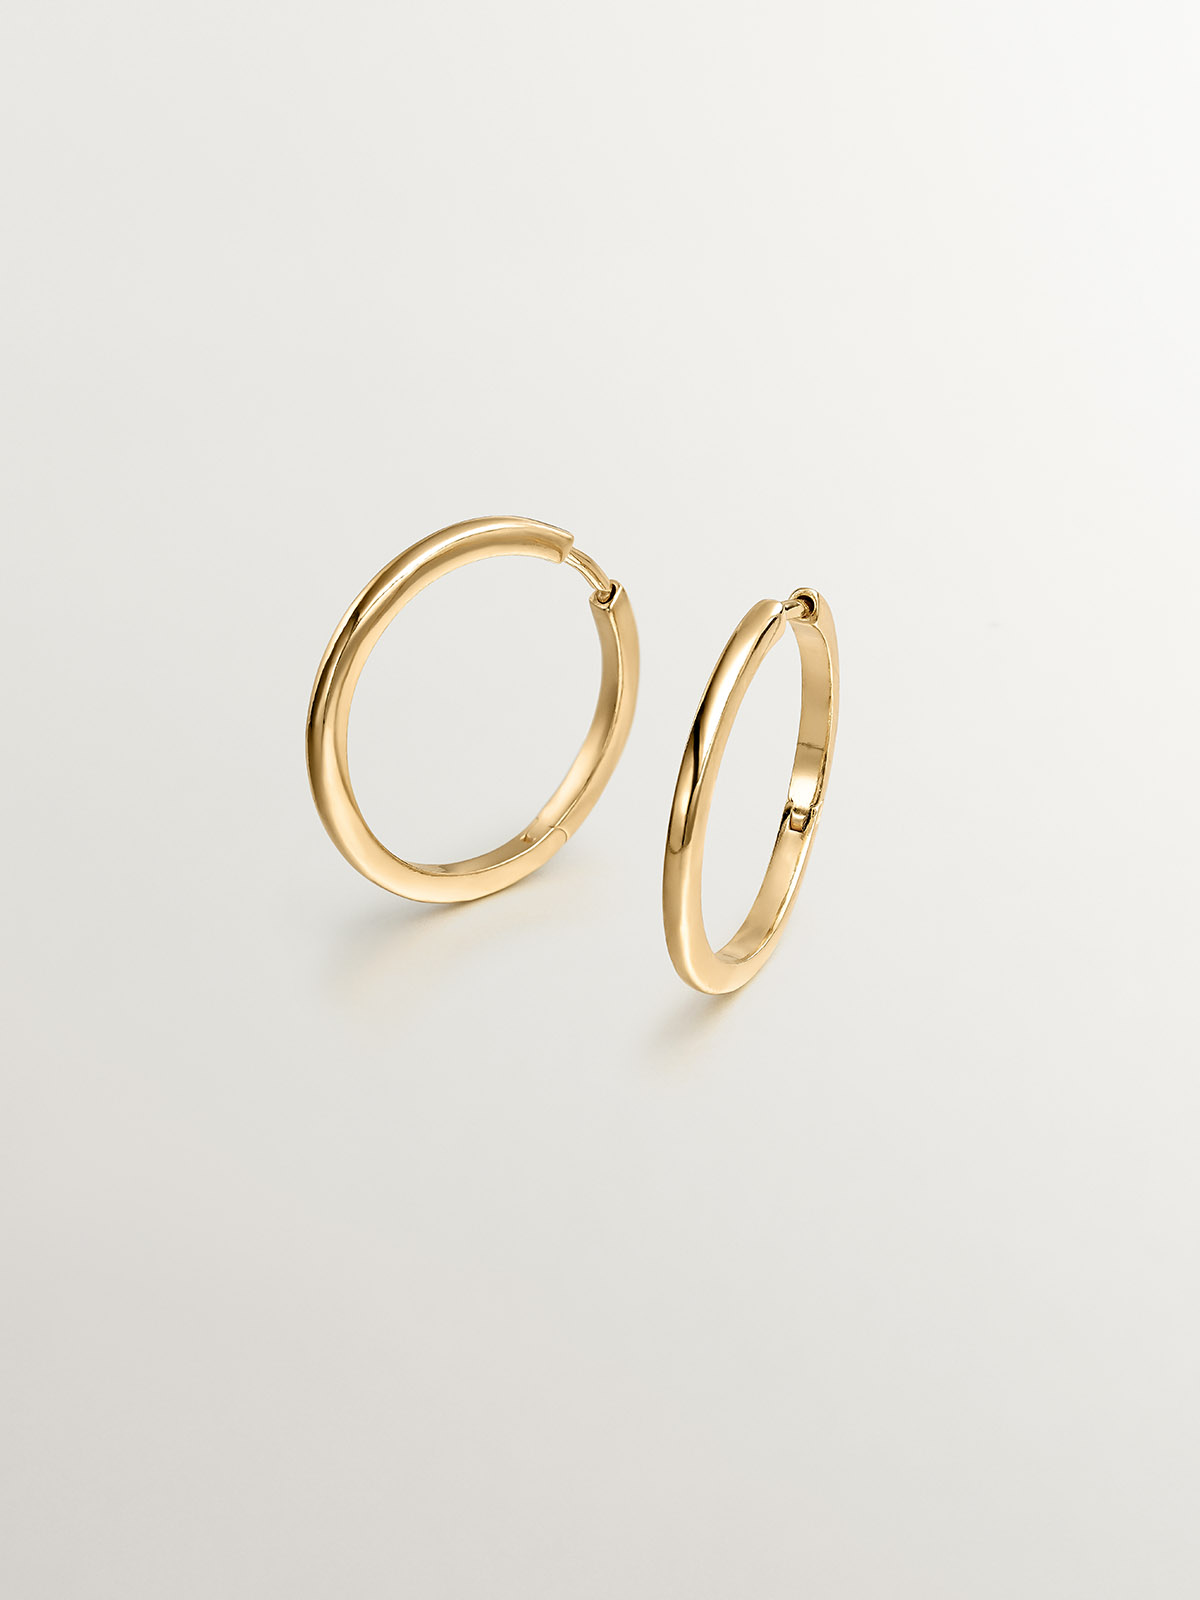 Medium-sized hoop earrings made of 925 silver, coated in 18K yellow gold.